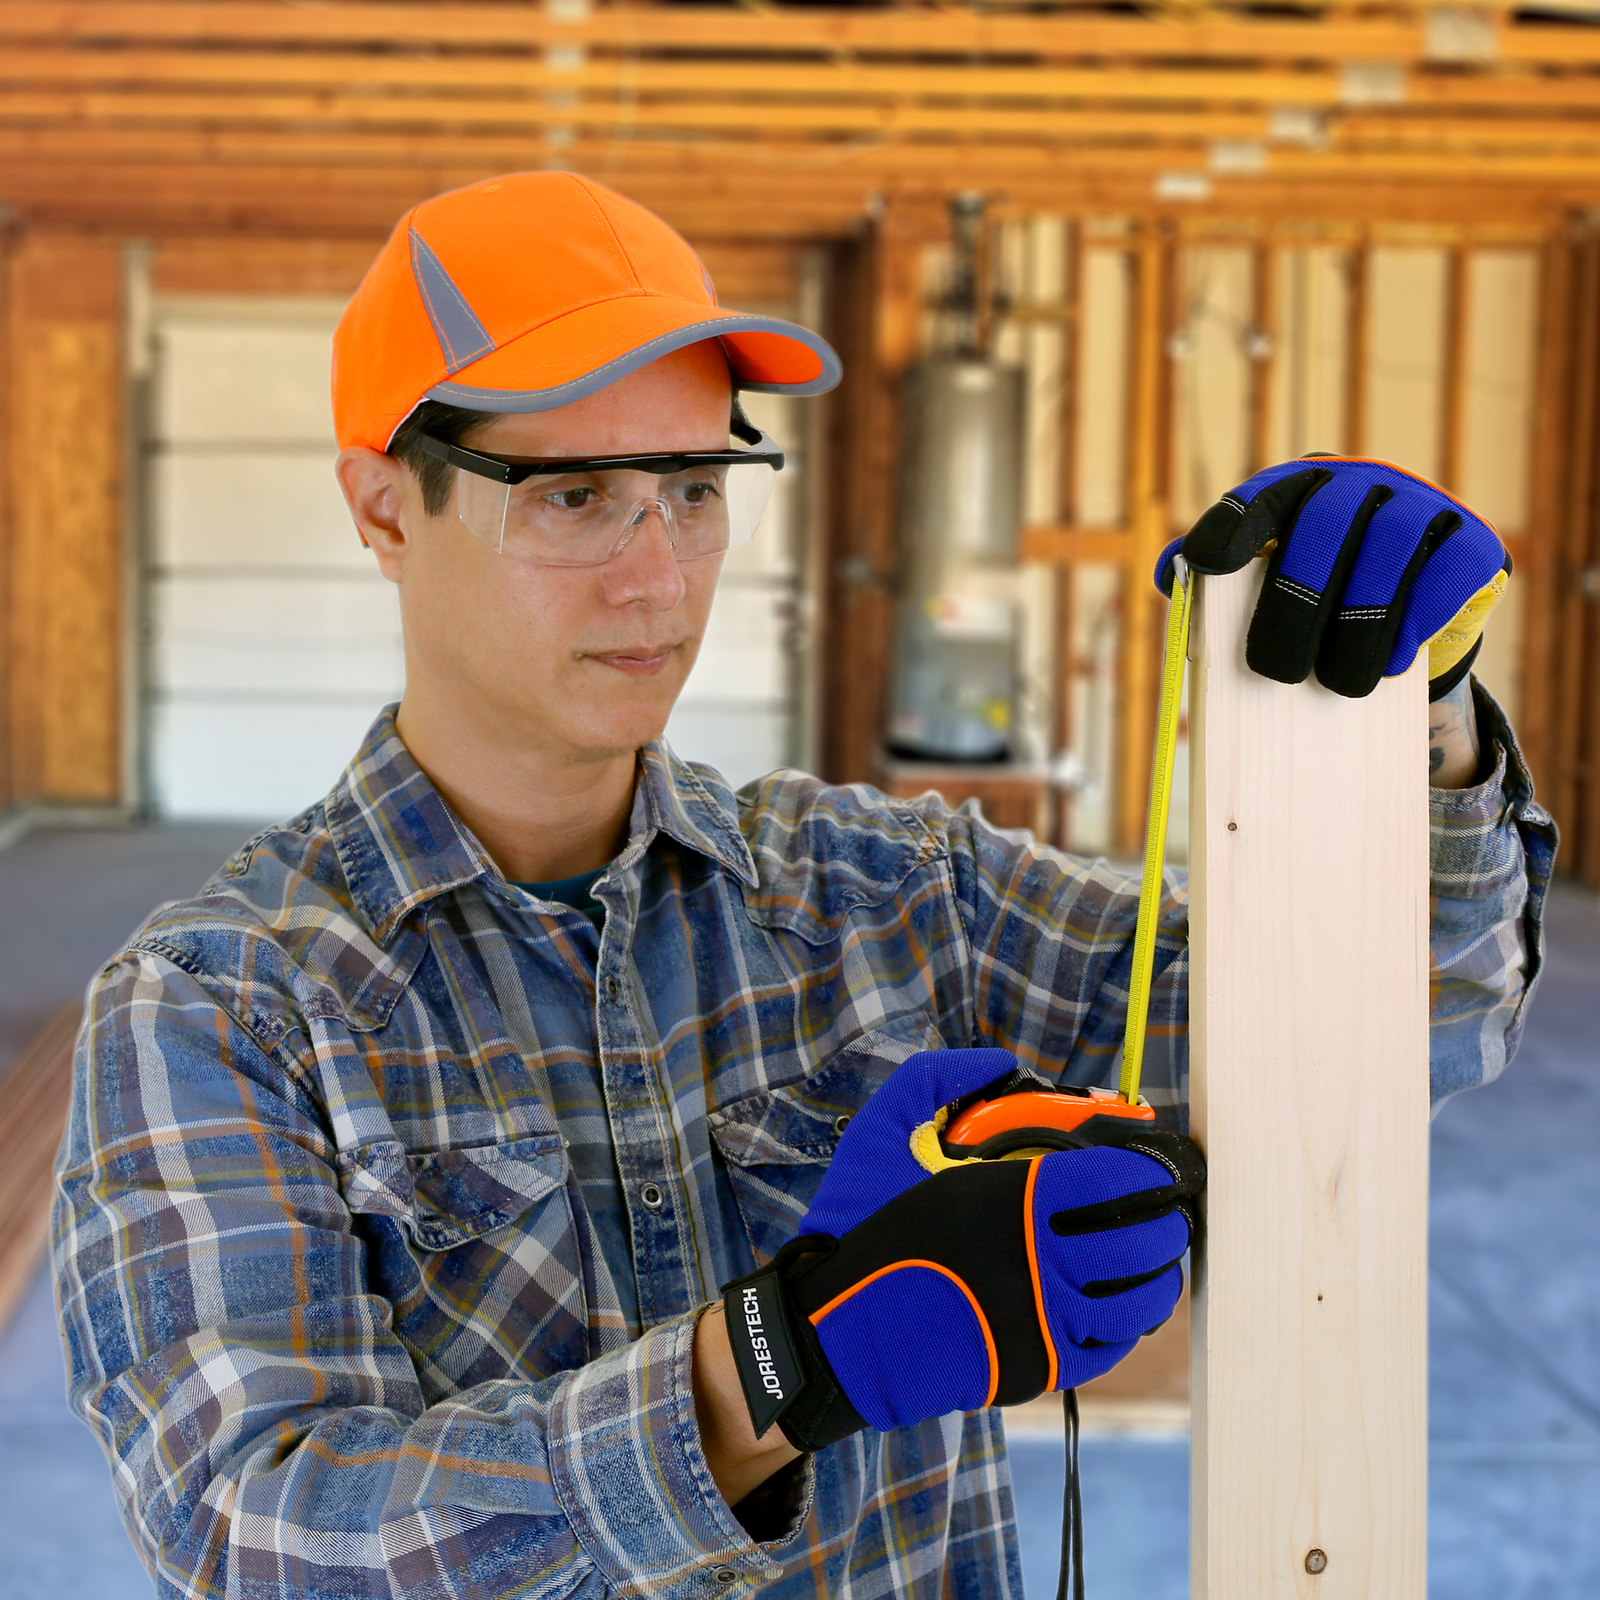 Man in a garage wearing safety gloves and the framed rectangular safety glasses with side shields for hi impact eye protection measuring a piece of wood uses in a DYI project 